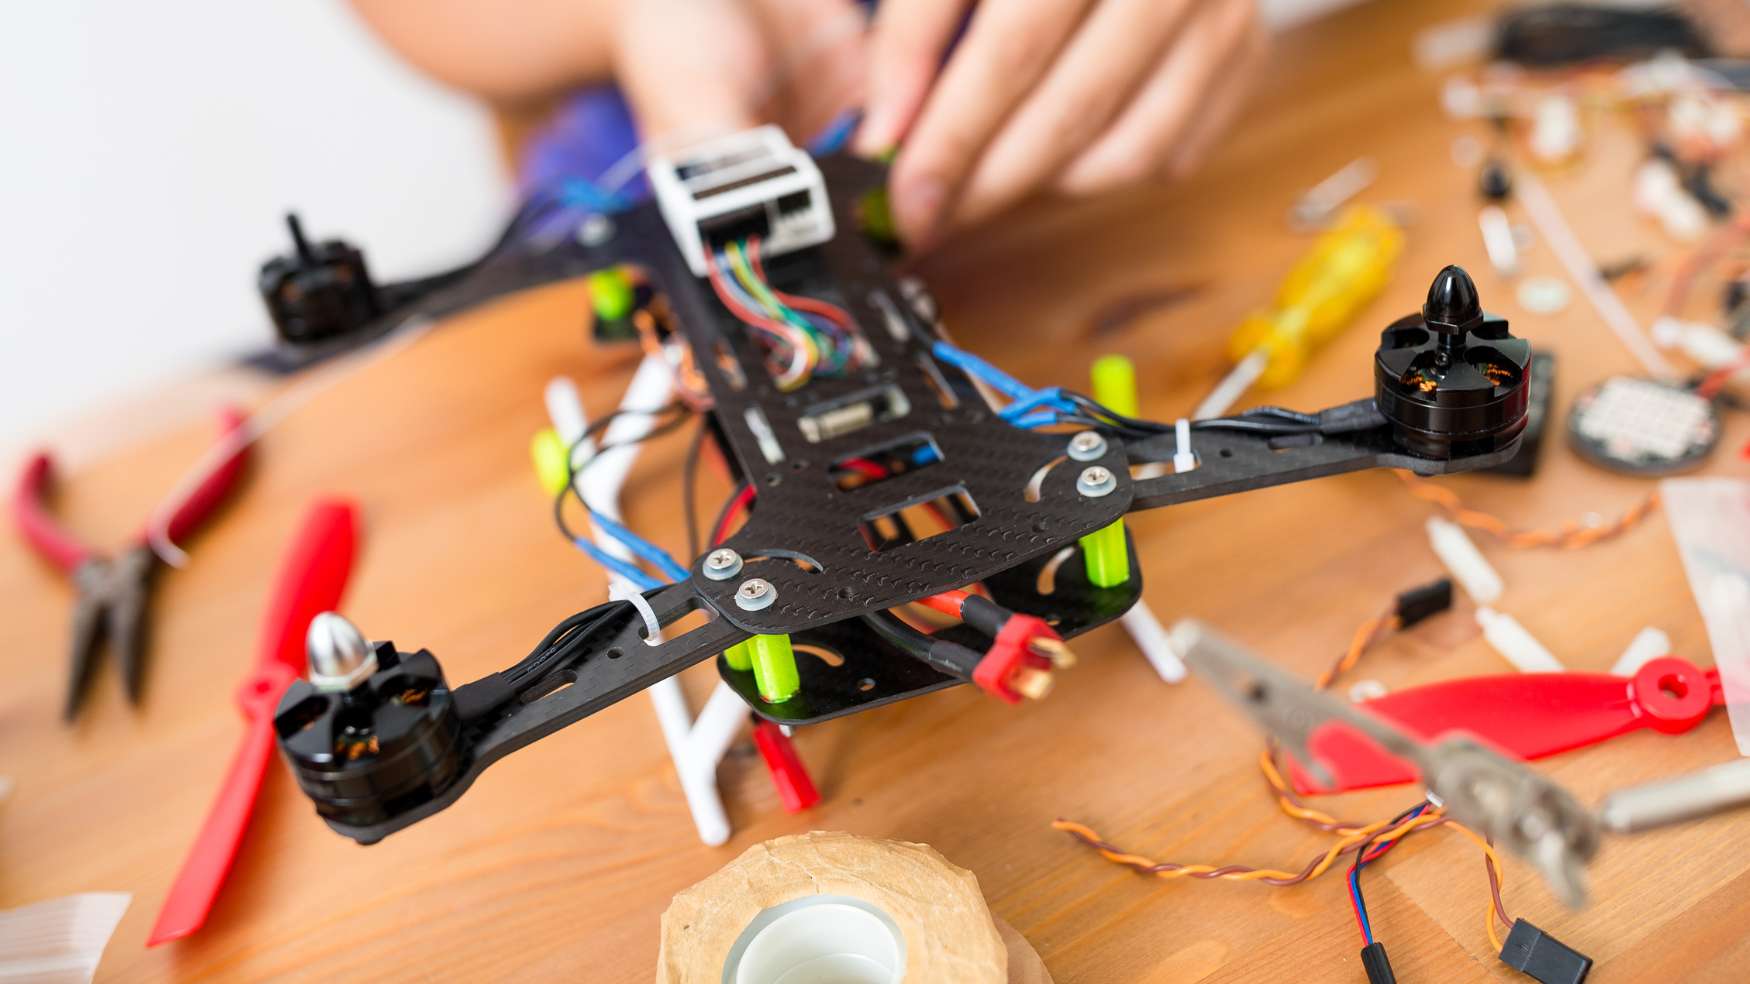 Image of person building a drone.